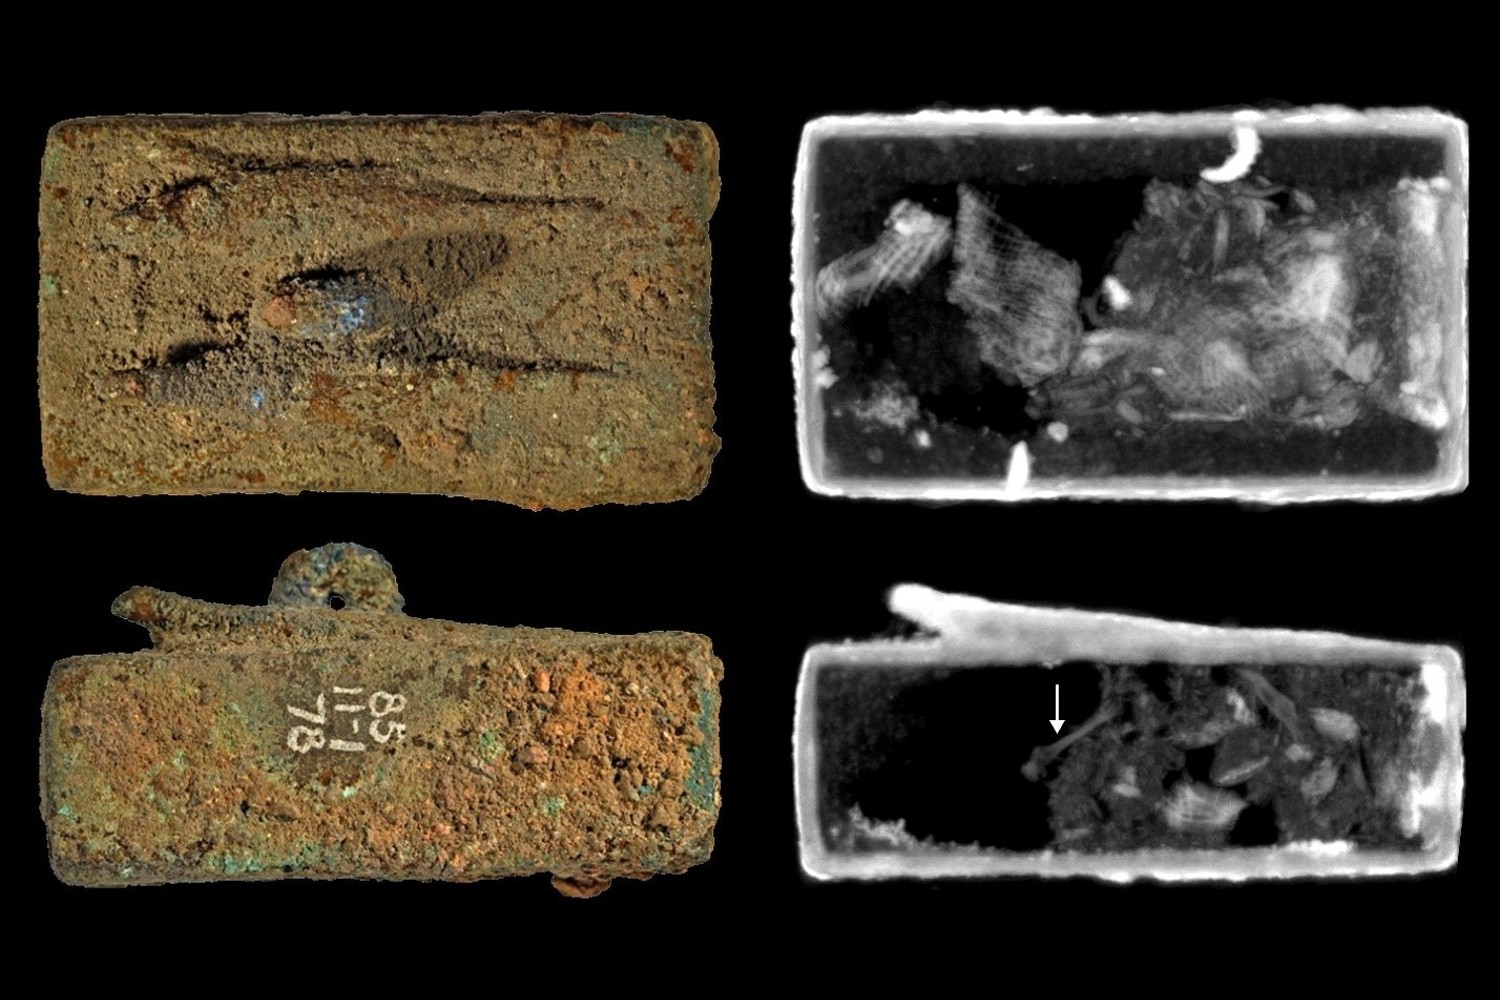 Neutron imaging of one animal coffin from Ancient Egypt